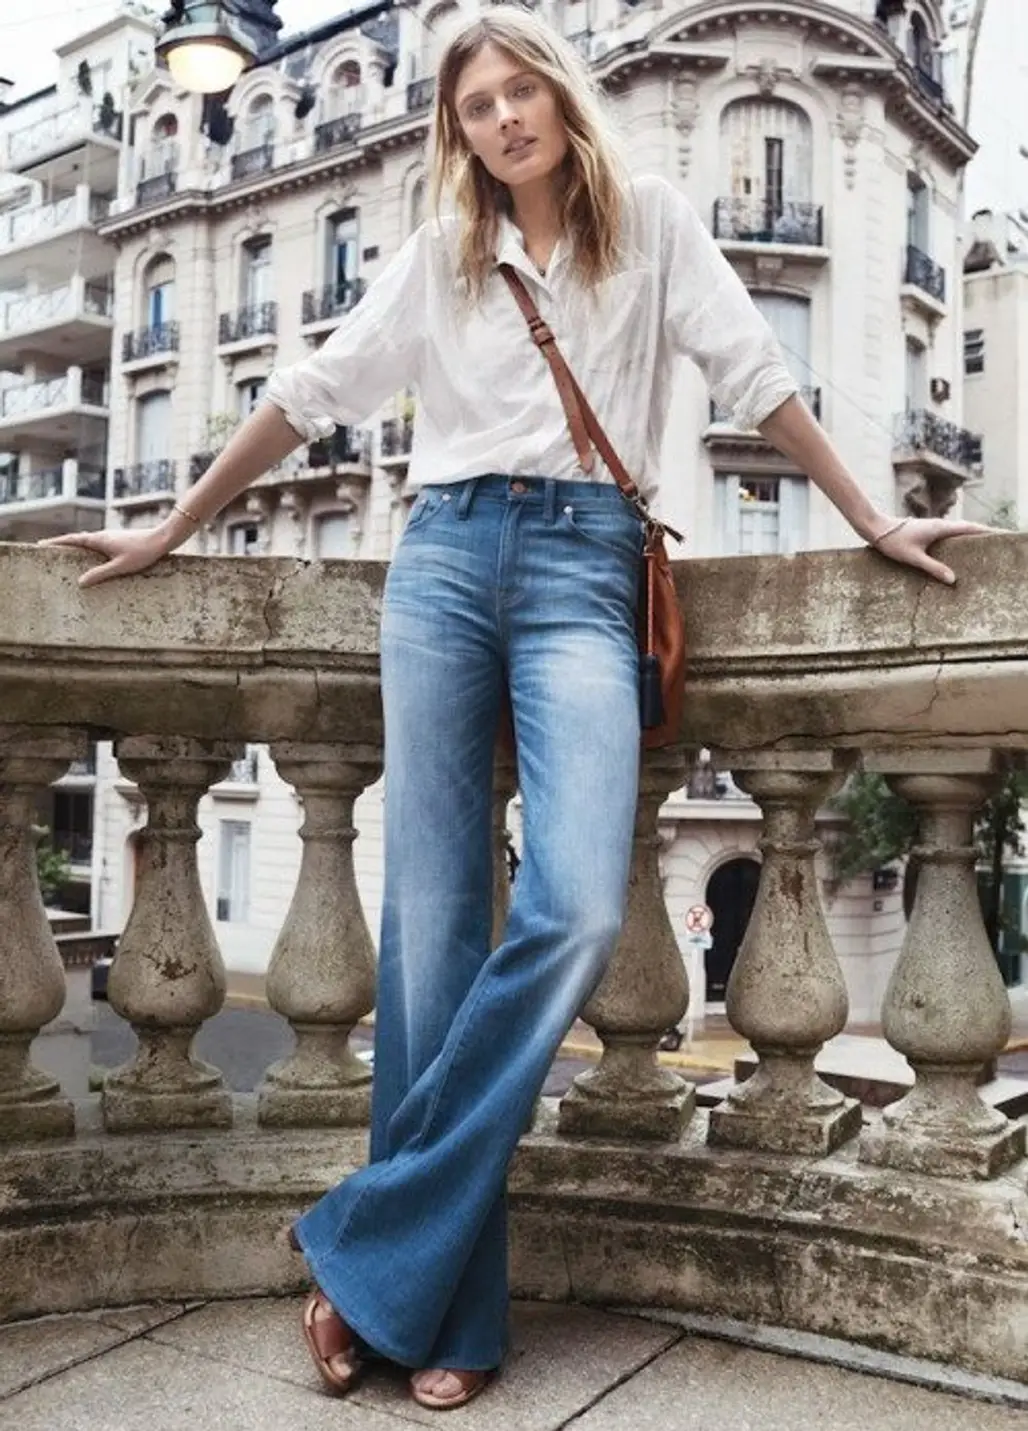 Channel the 70s with Flared Jeans